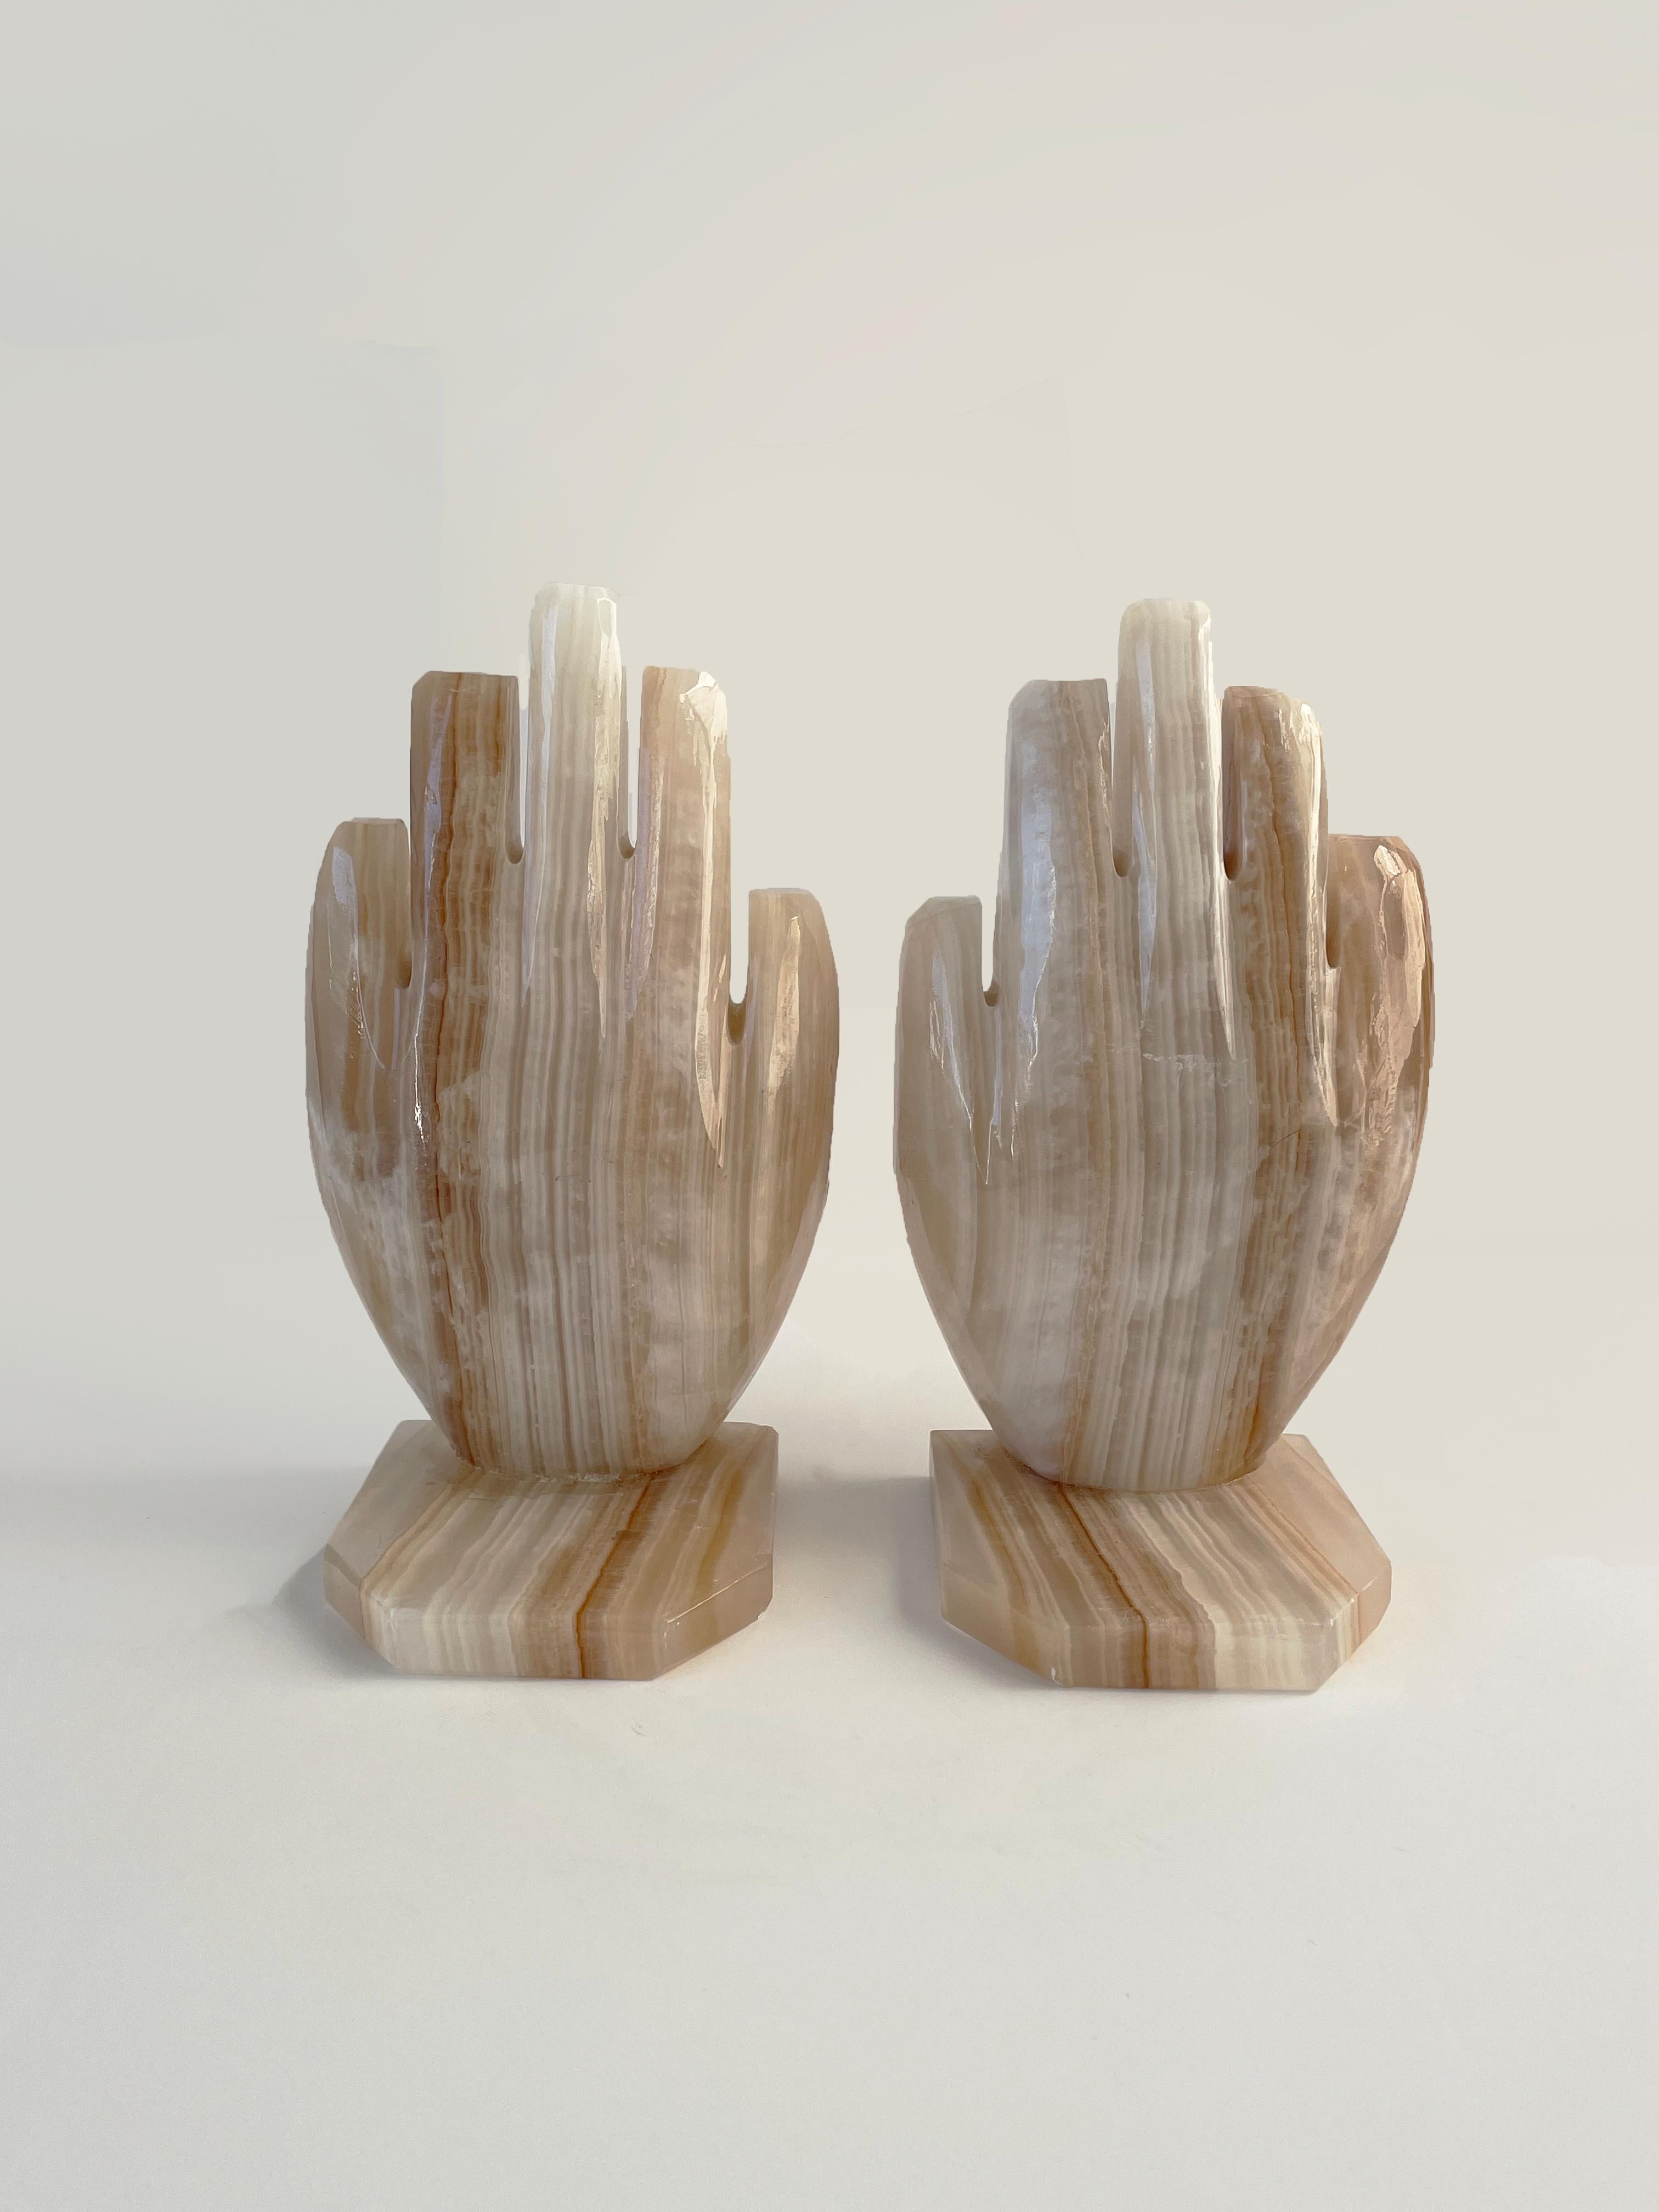 Nearly perfect carved onyx hand shaped bookends. Each measures 6.5 x 3.5 x 4